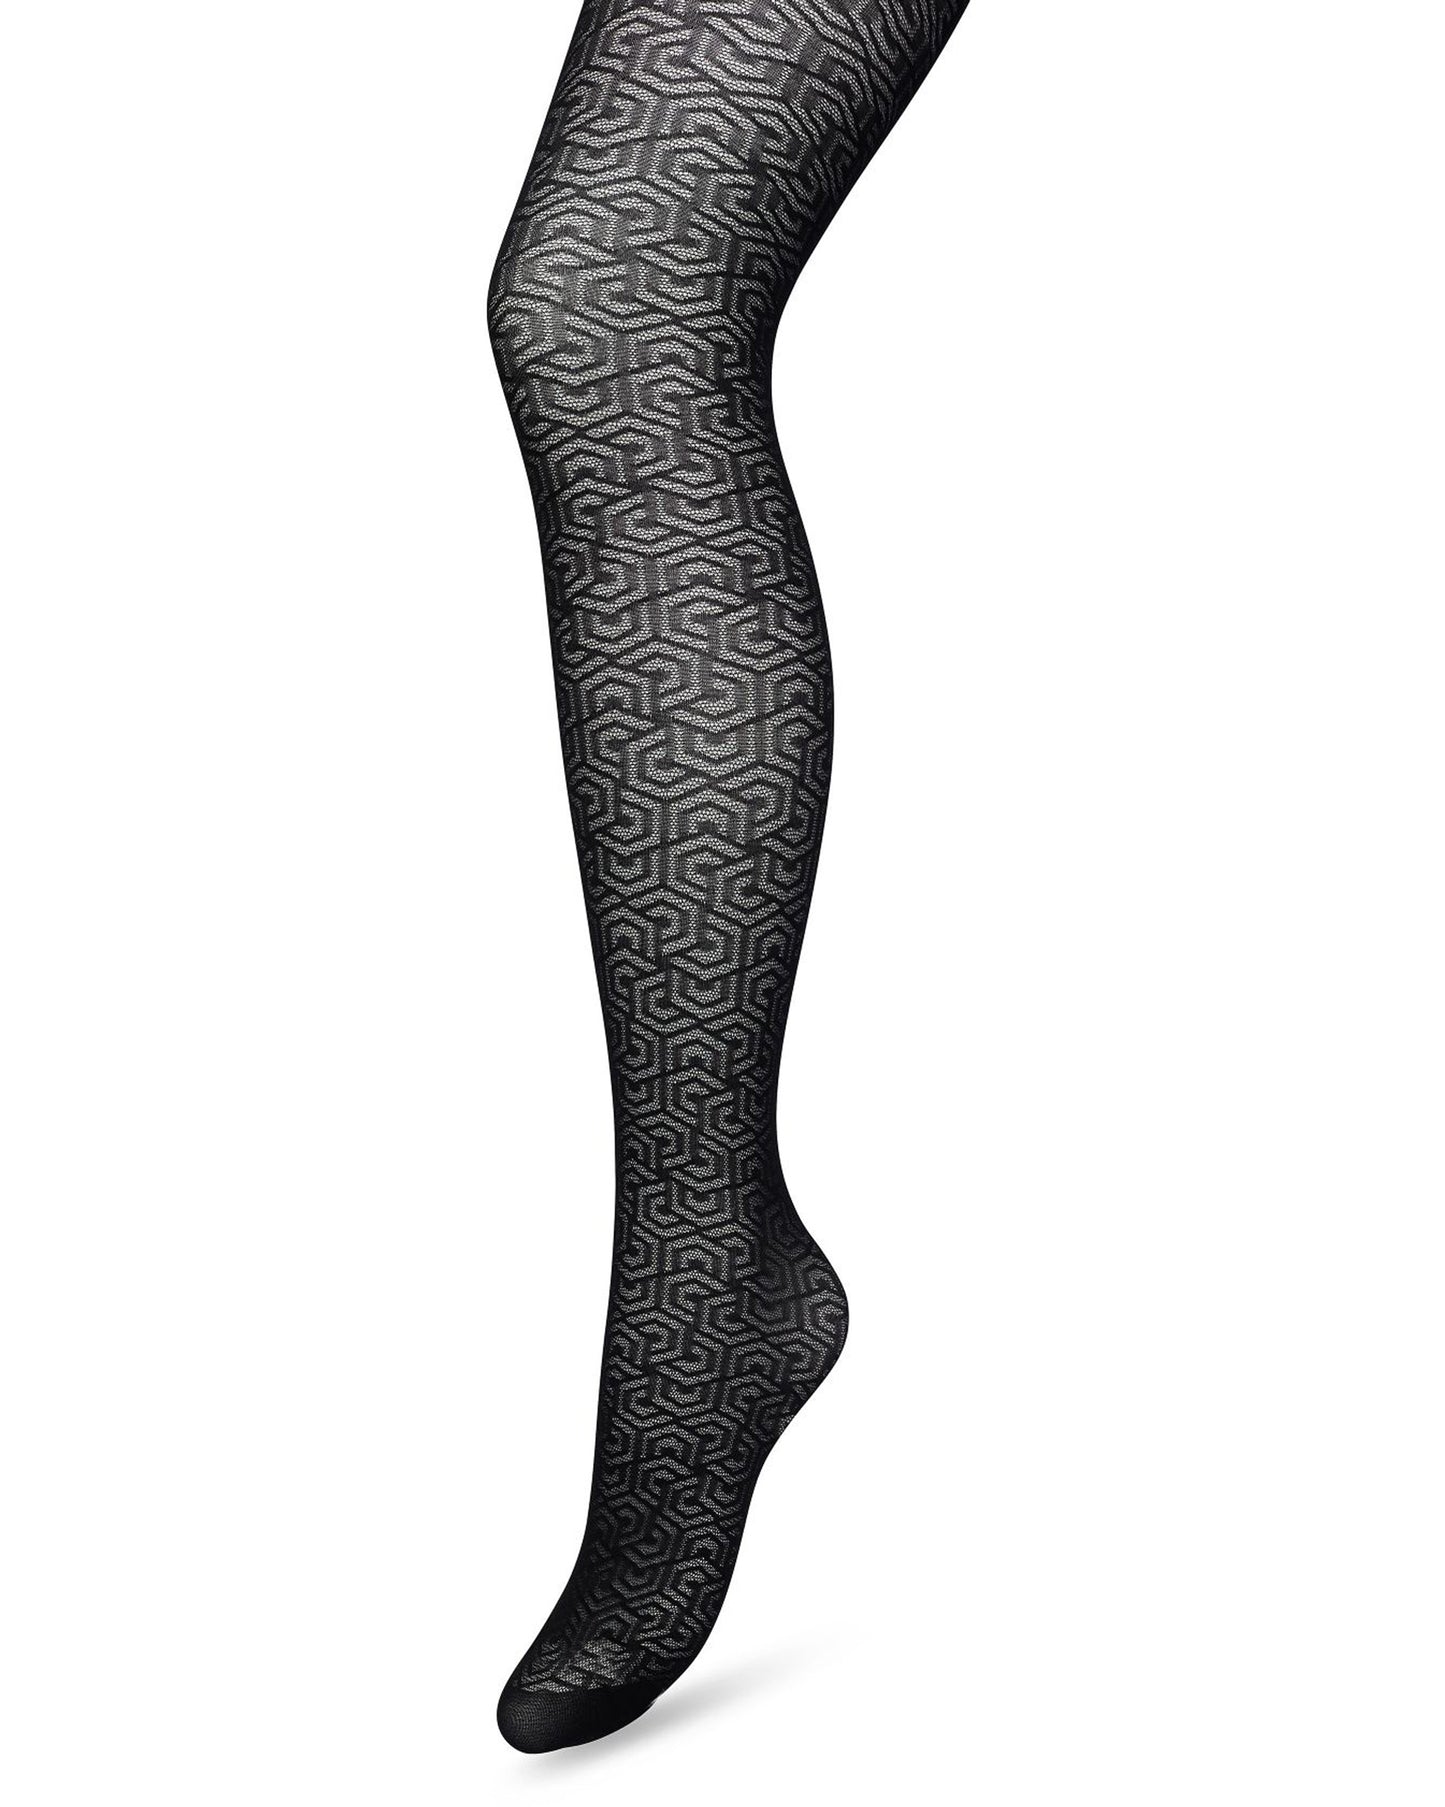 Bonnie Doon BP221911 Eclectic Graphic Tights - Semi-sheer black fashion tights with a woven opaque linear geometric style pattern, flat seams, deep waist and gusset.